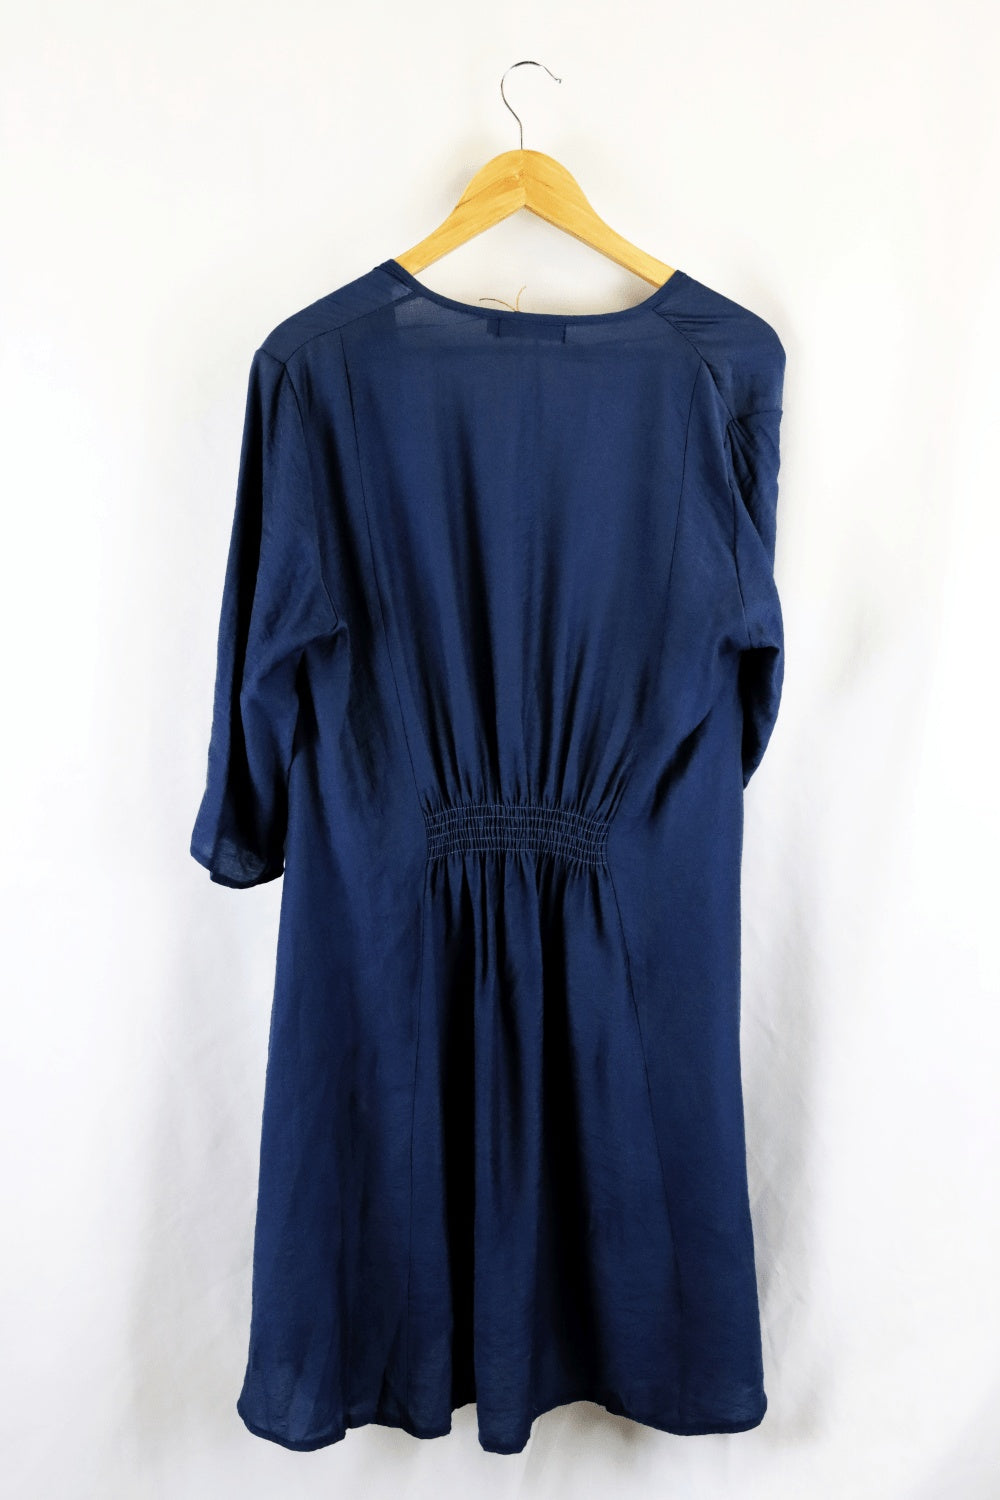 Bamboo By Whispers Blue Long Sleeve Top L